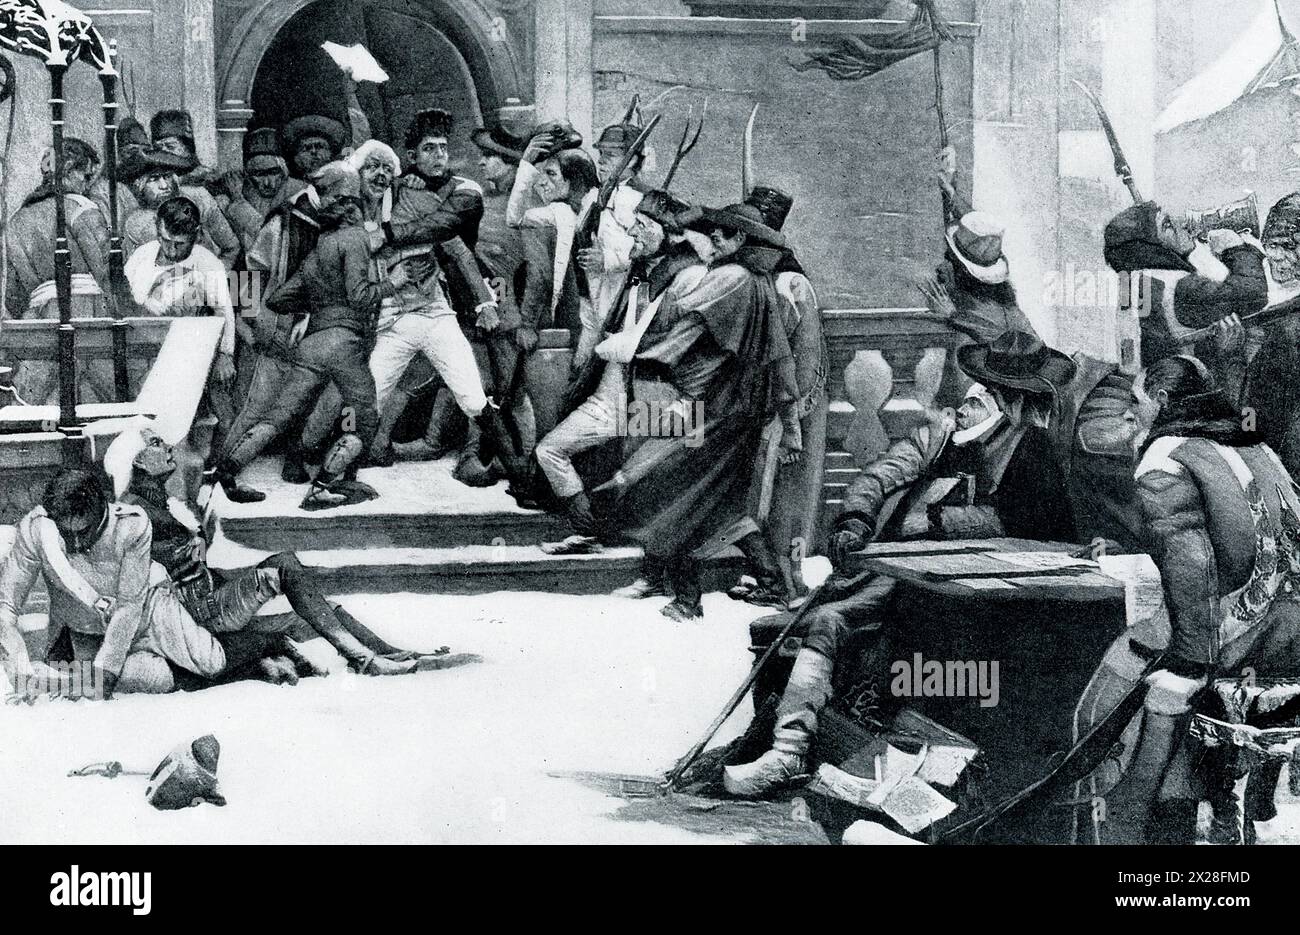 The early 1900s caption reads: 'BOHEMIAN INSURRECTION OF 1790.—The Bohemian peasants, or rather serfs, mere slaves of the nobles and terribly downtrodden, heard of the great French Revolution, learned that men were supposed to be equal, and so rose against their oppressors. Naturally their excesses were proportioned to the dense ignorance in which they had been kept, and terrible was the fate of the unfortunate nobles who fell into their hands. The insurgents were scarce human in their ferocity. Regular troops, however, found little difficulty in suppressing them.' Stock Photo